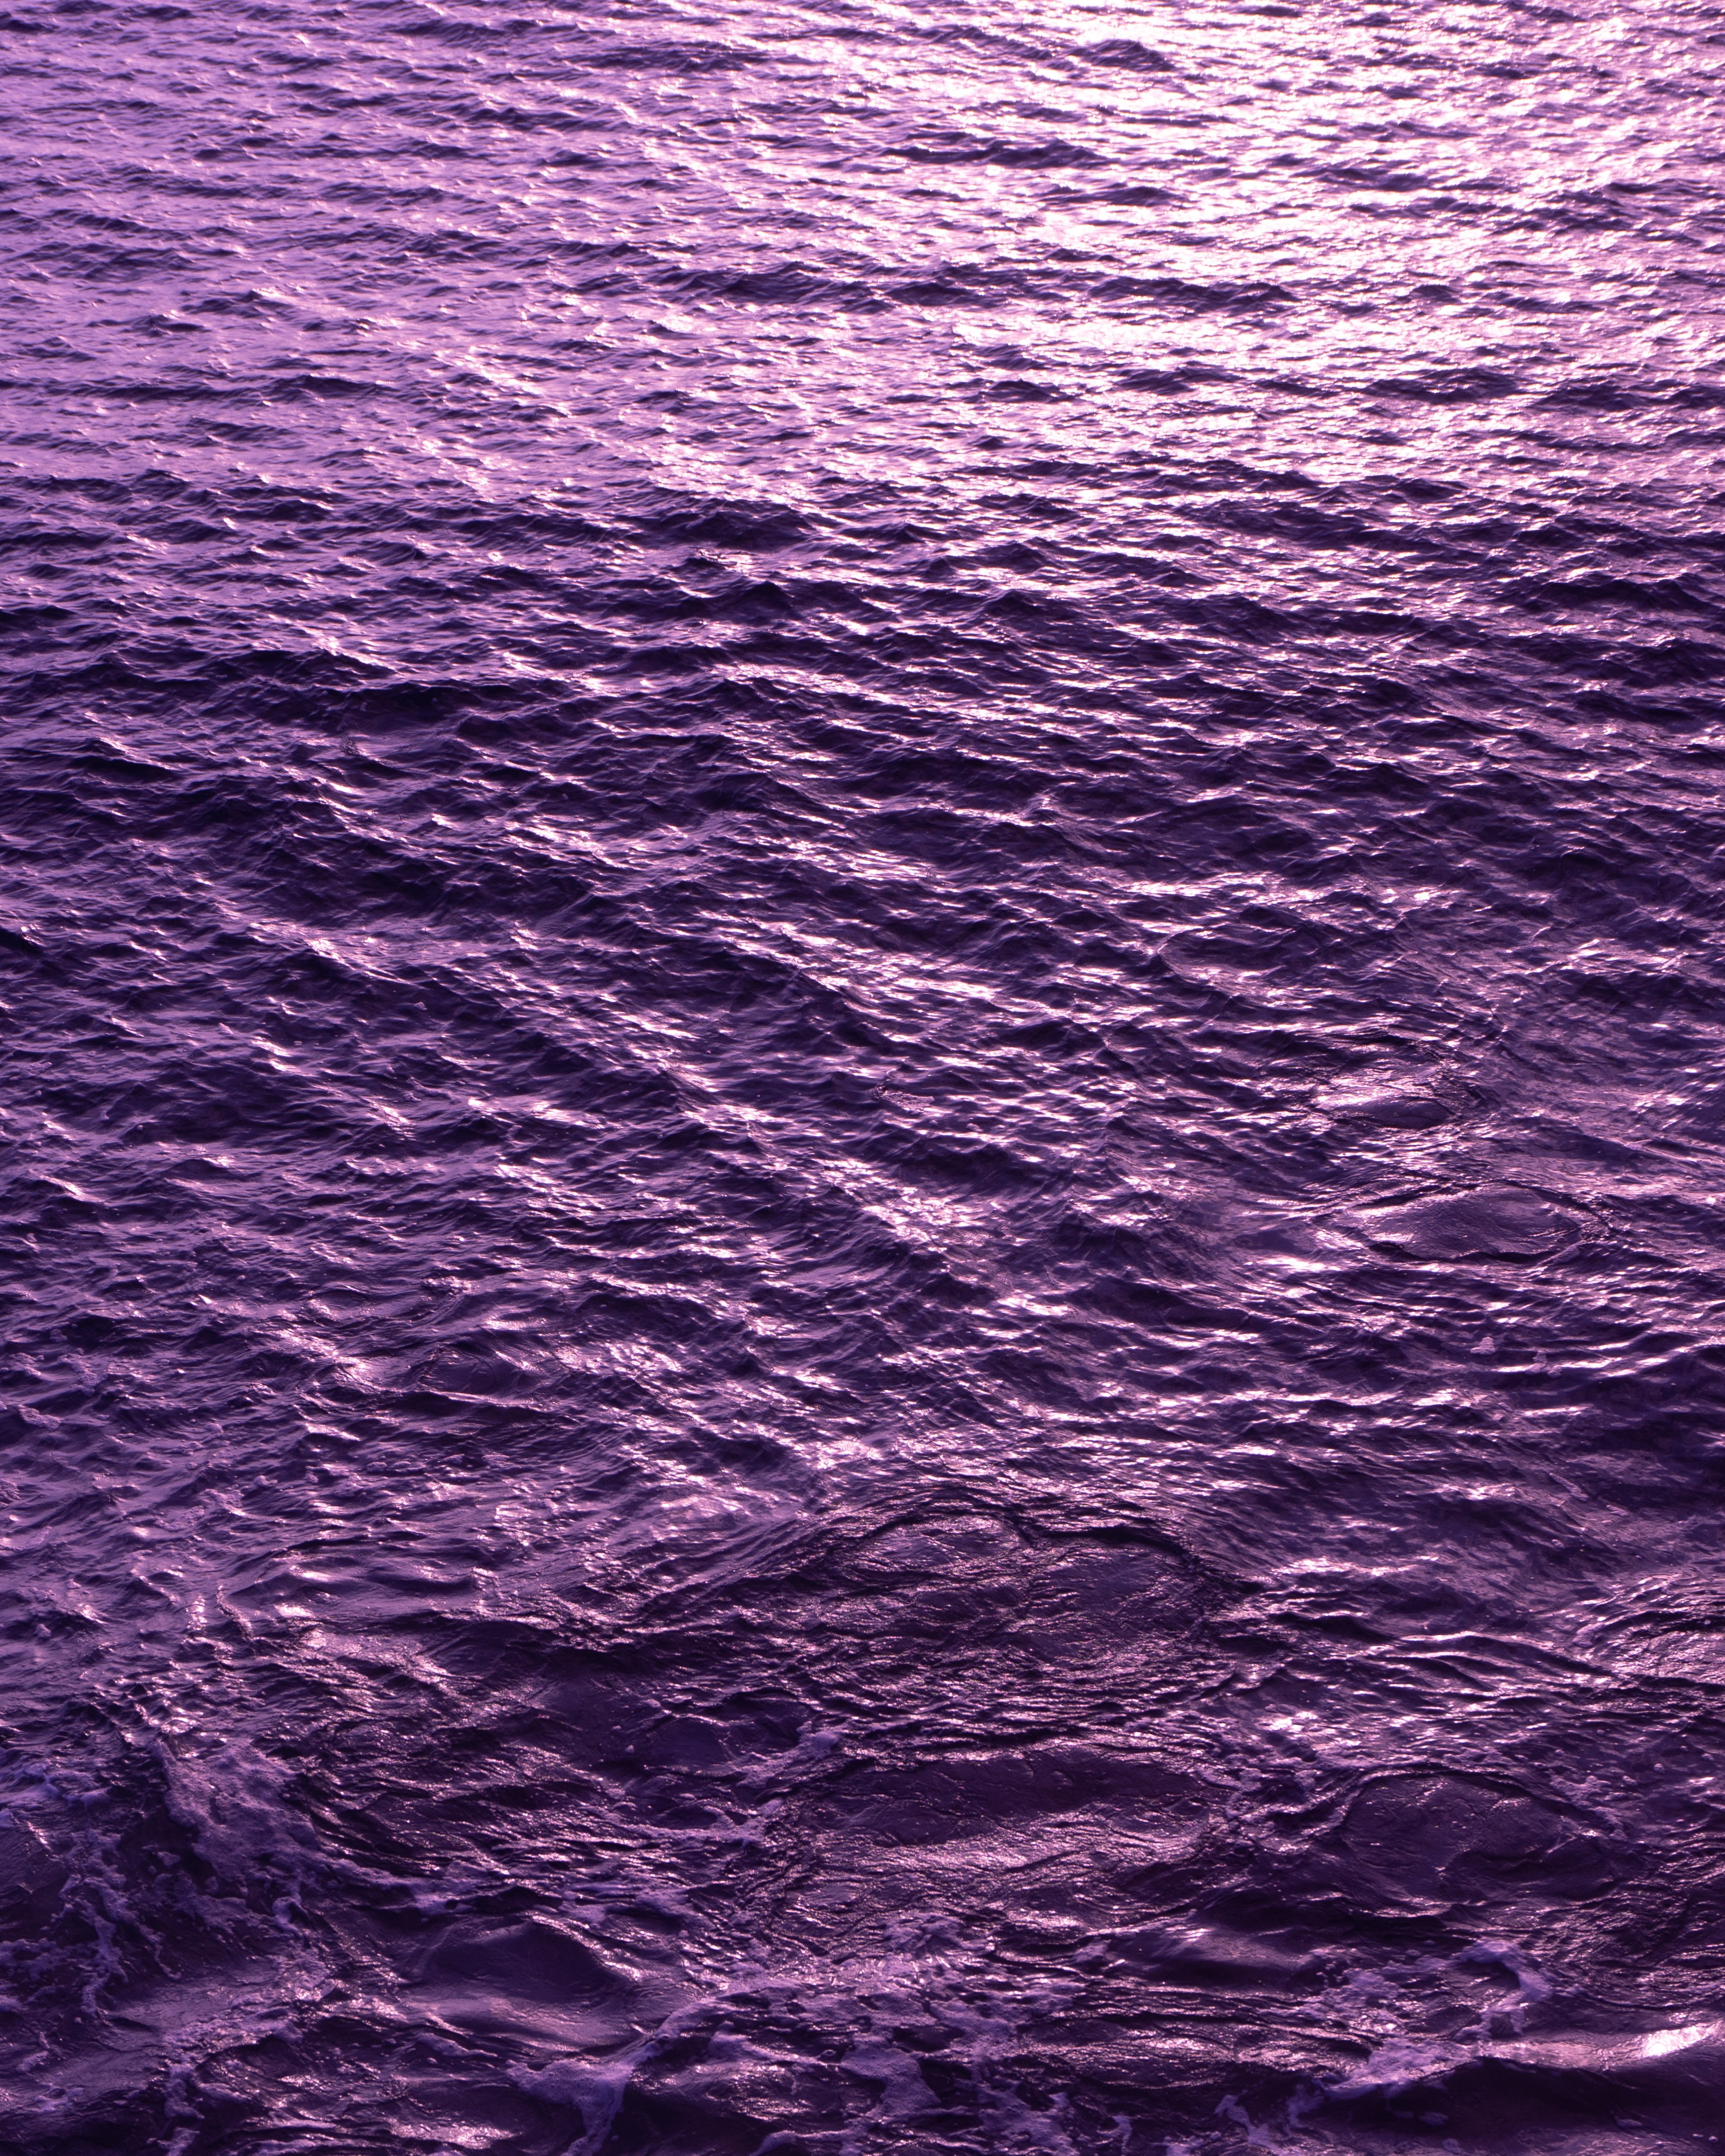 purple, surface, water, nature, waves, violet, ripples, ripple Phone Background